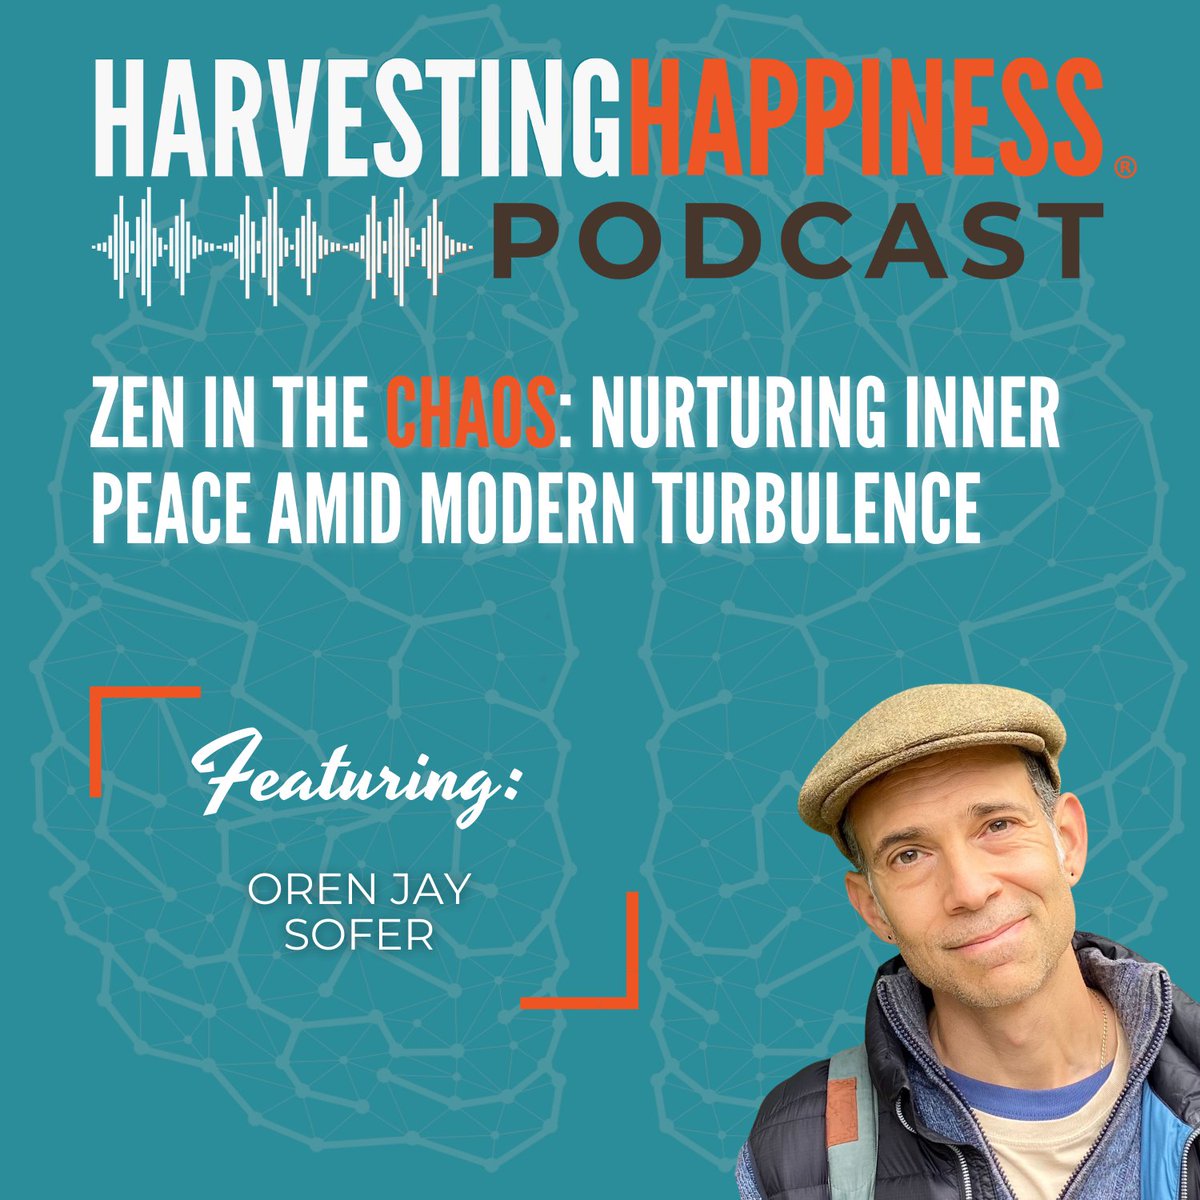 New podcast episode alert! #701 is LIVE NOW! 📻 Discover how to navigate the chaos of everyday life ☀ with, 'Zen in the Chaos' with Harvesting Happiness guest @orenjaysofer. We dive deep into the transformative potential of contemplative practices and provide valuable #tips…